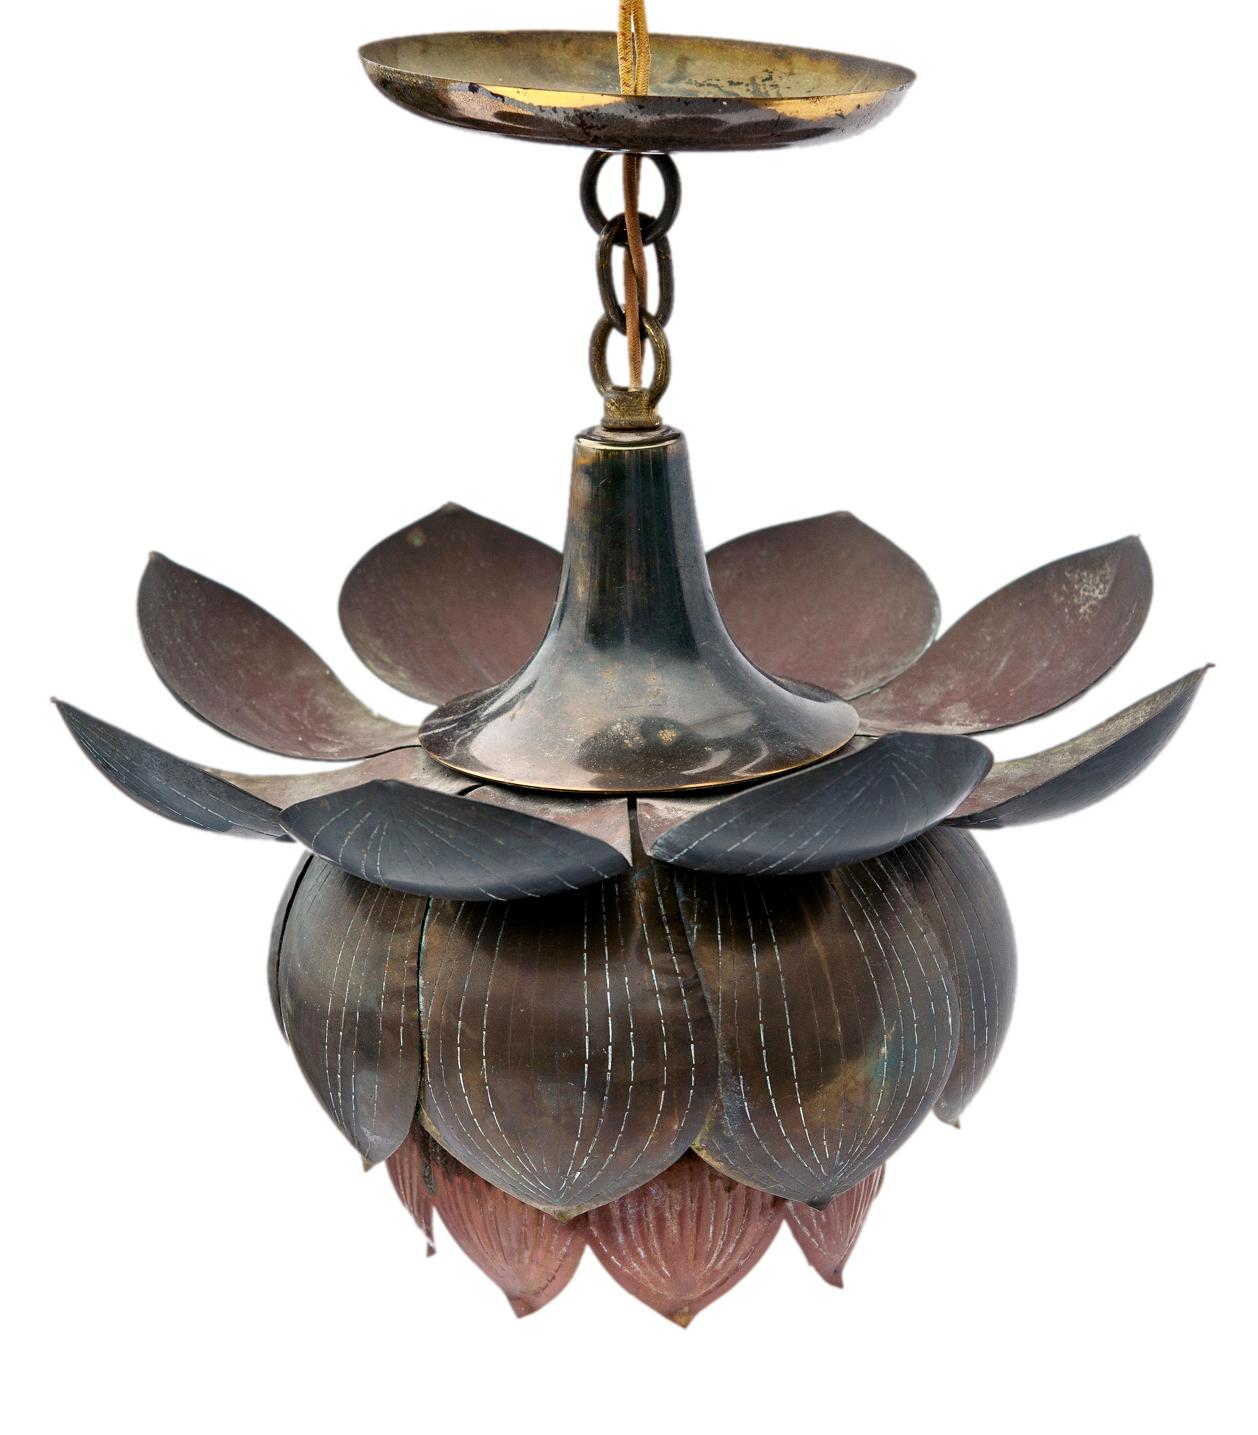 Circa 1960’s Italian lotus flower repoussé brass light fixture with one interior light. The fixture features a brass lotus flower hanging from a short chain the original canopy & chain in polished brass are included.  A striking piece with pretty